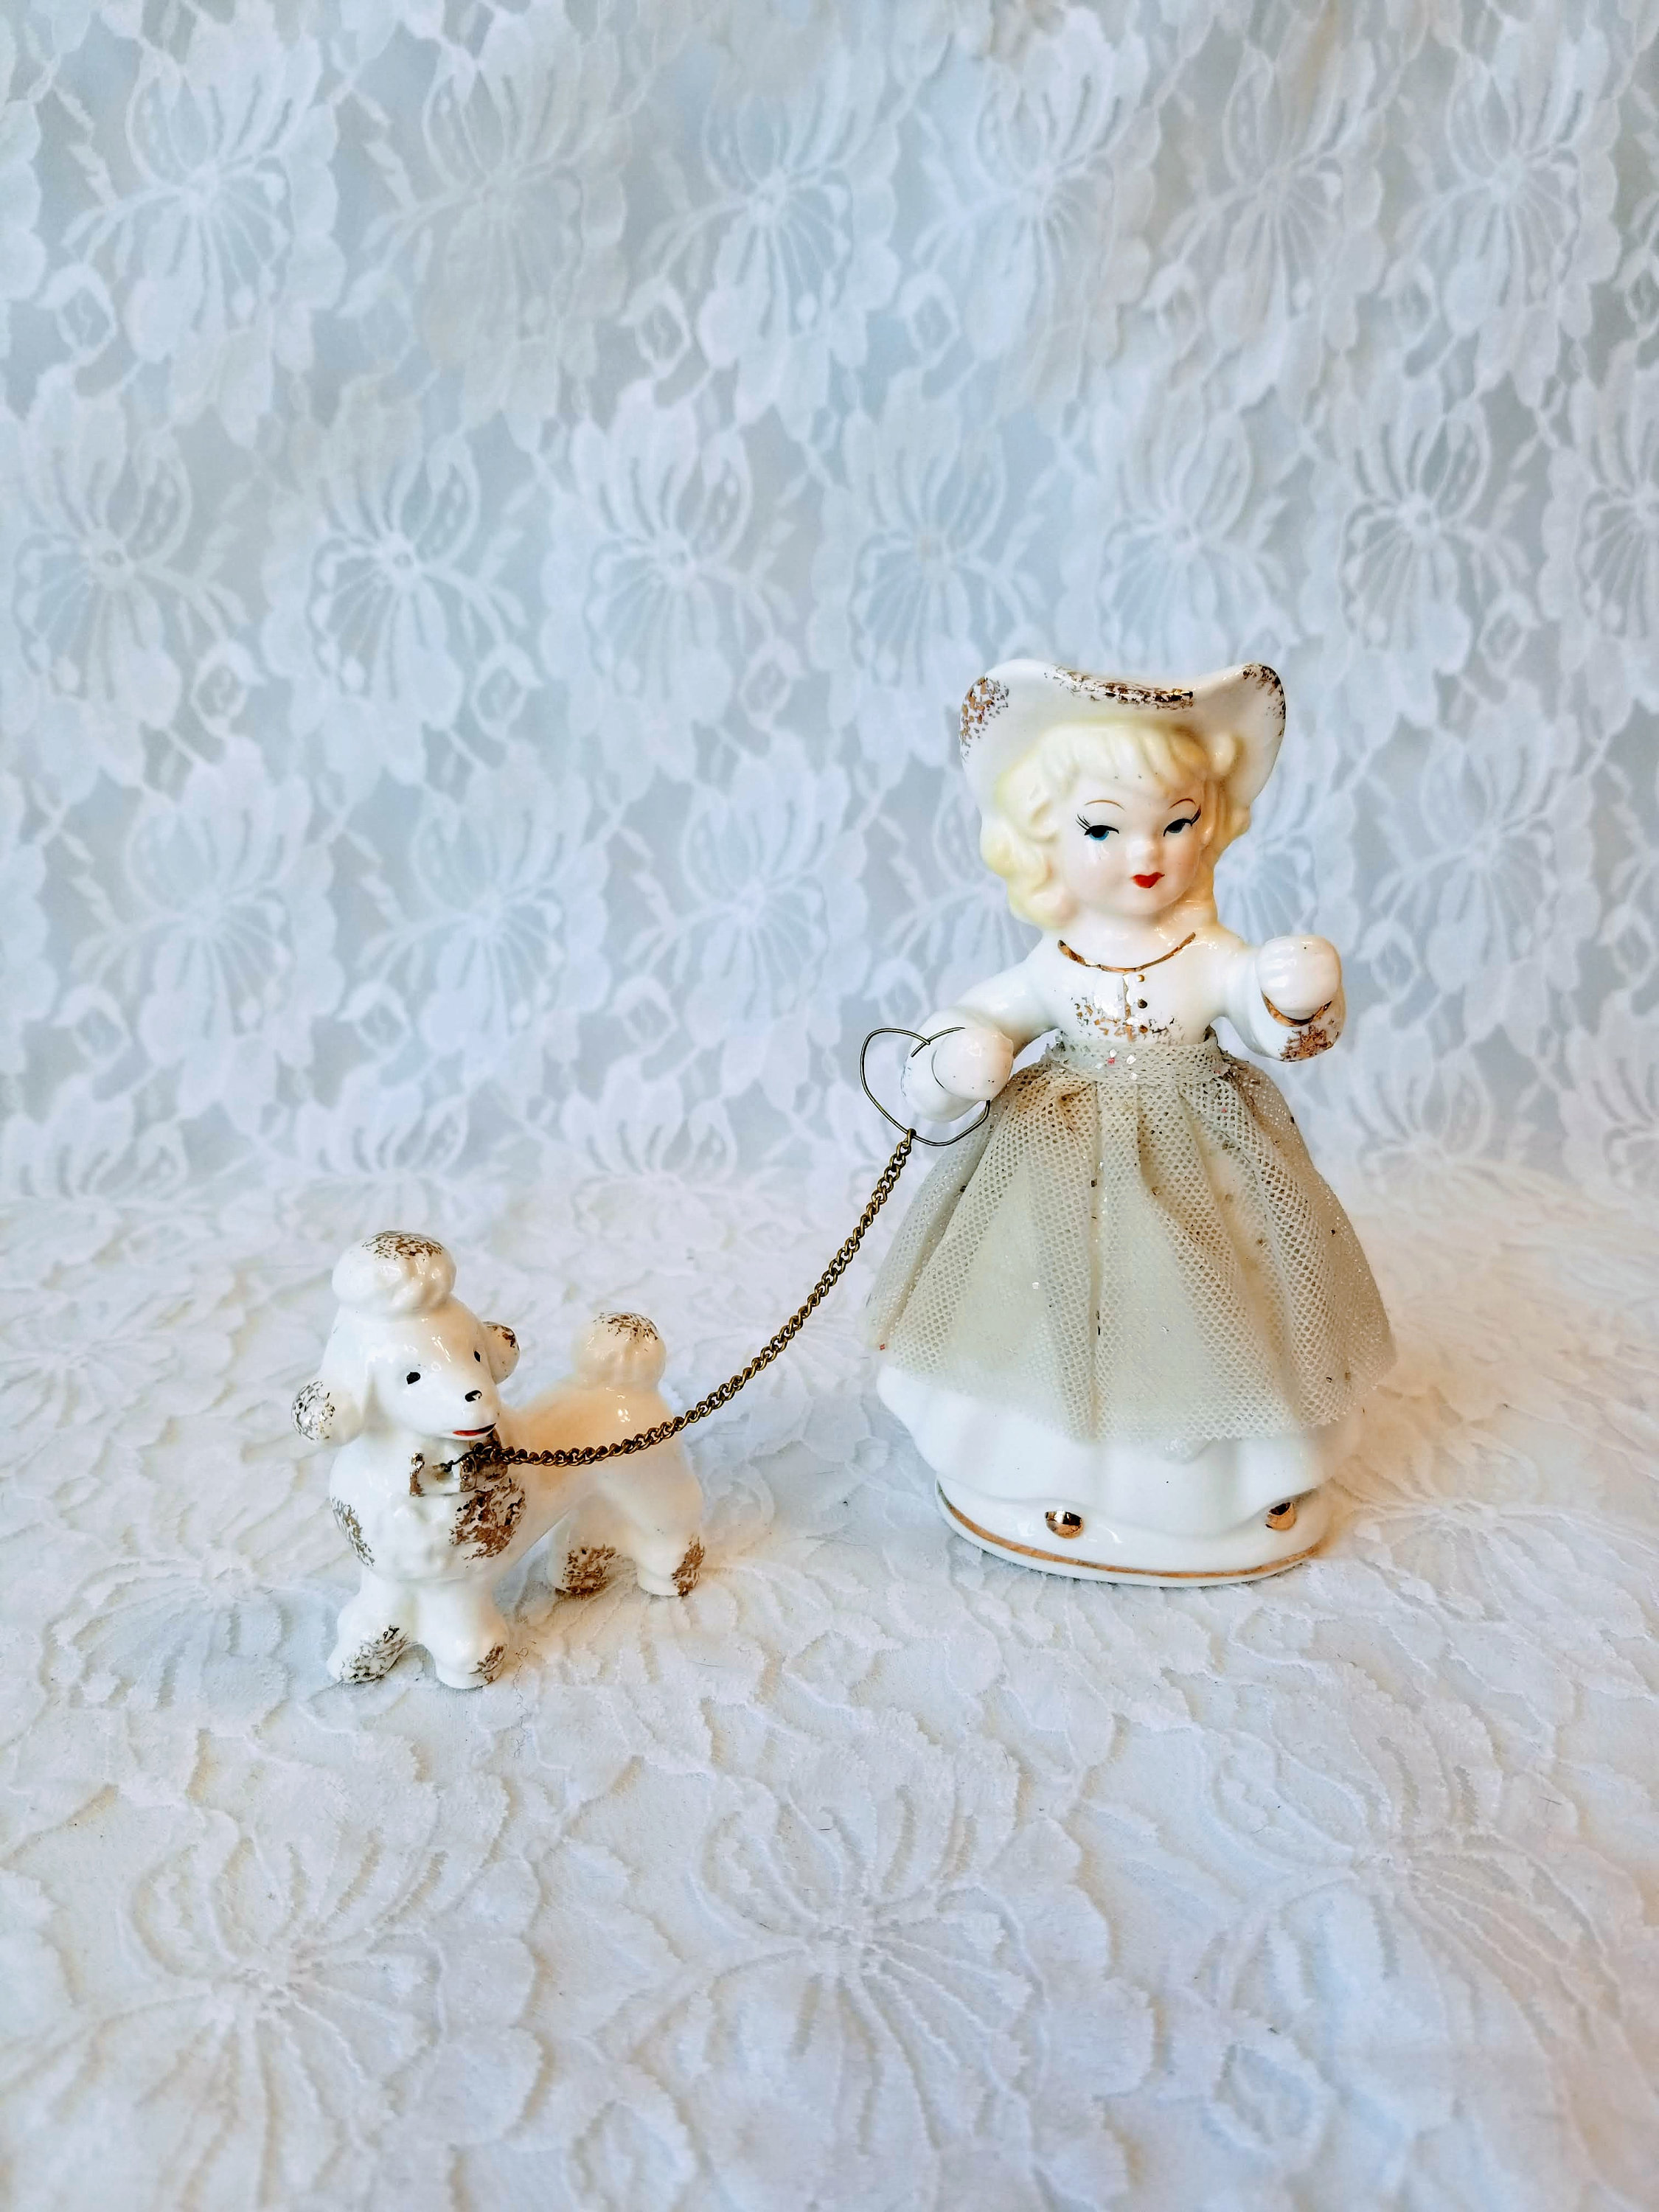 Vintage 1950s Girl With Poodle On Leash Figurine Consco